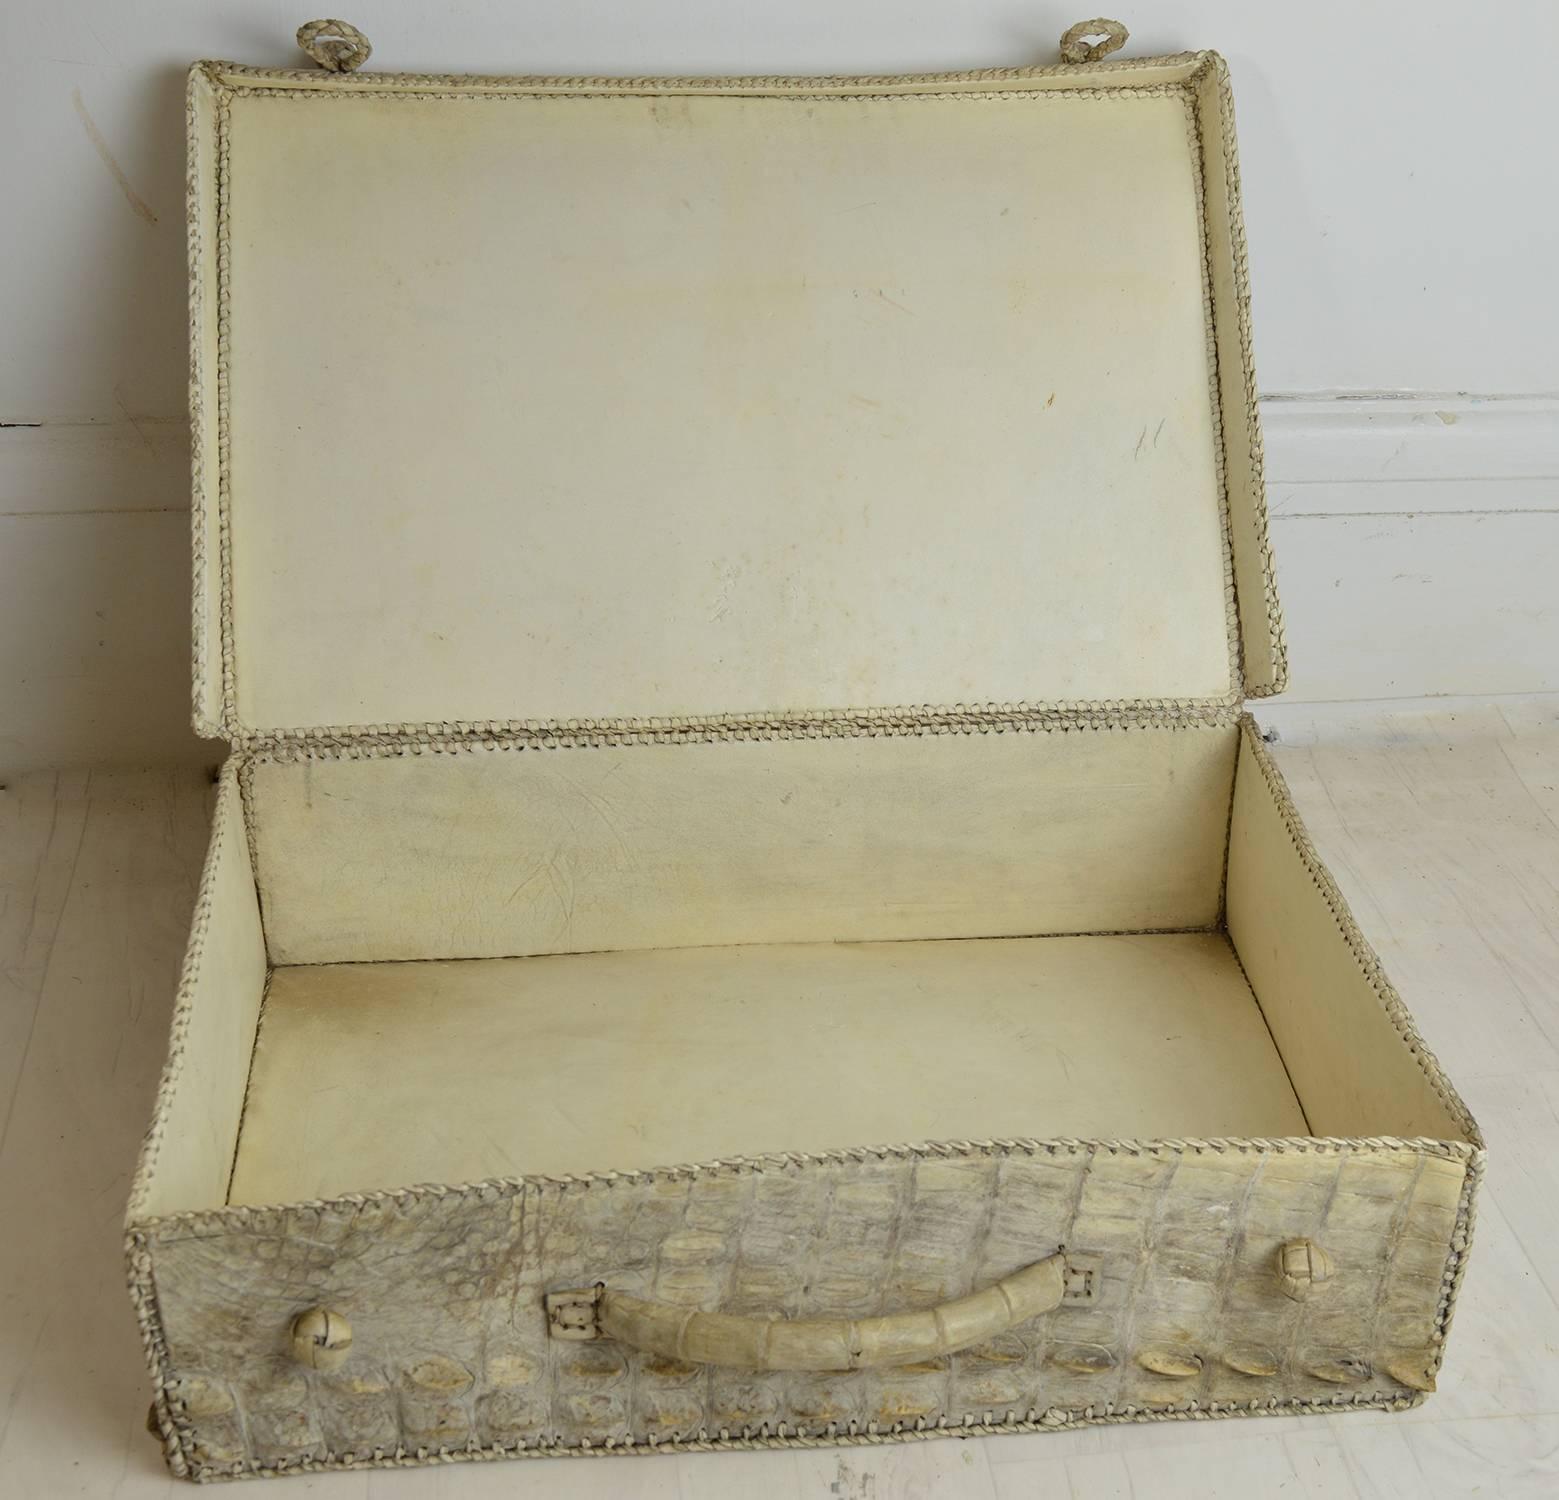 Hand-Crafted Vintage White Crocodile Skin Suitcase, Mid-20th Century